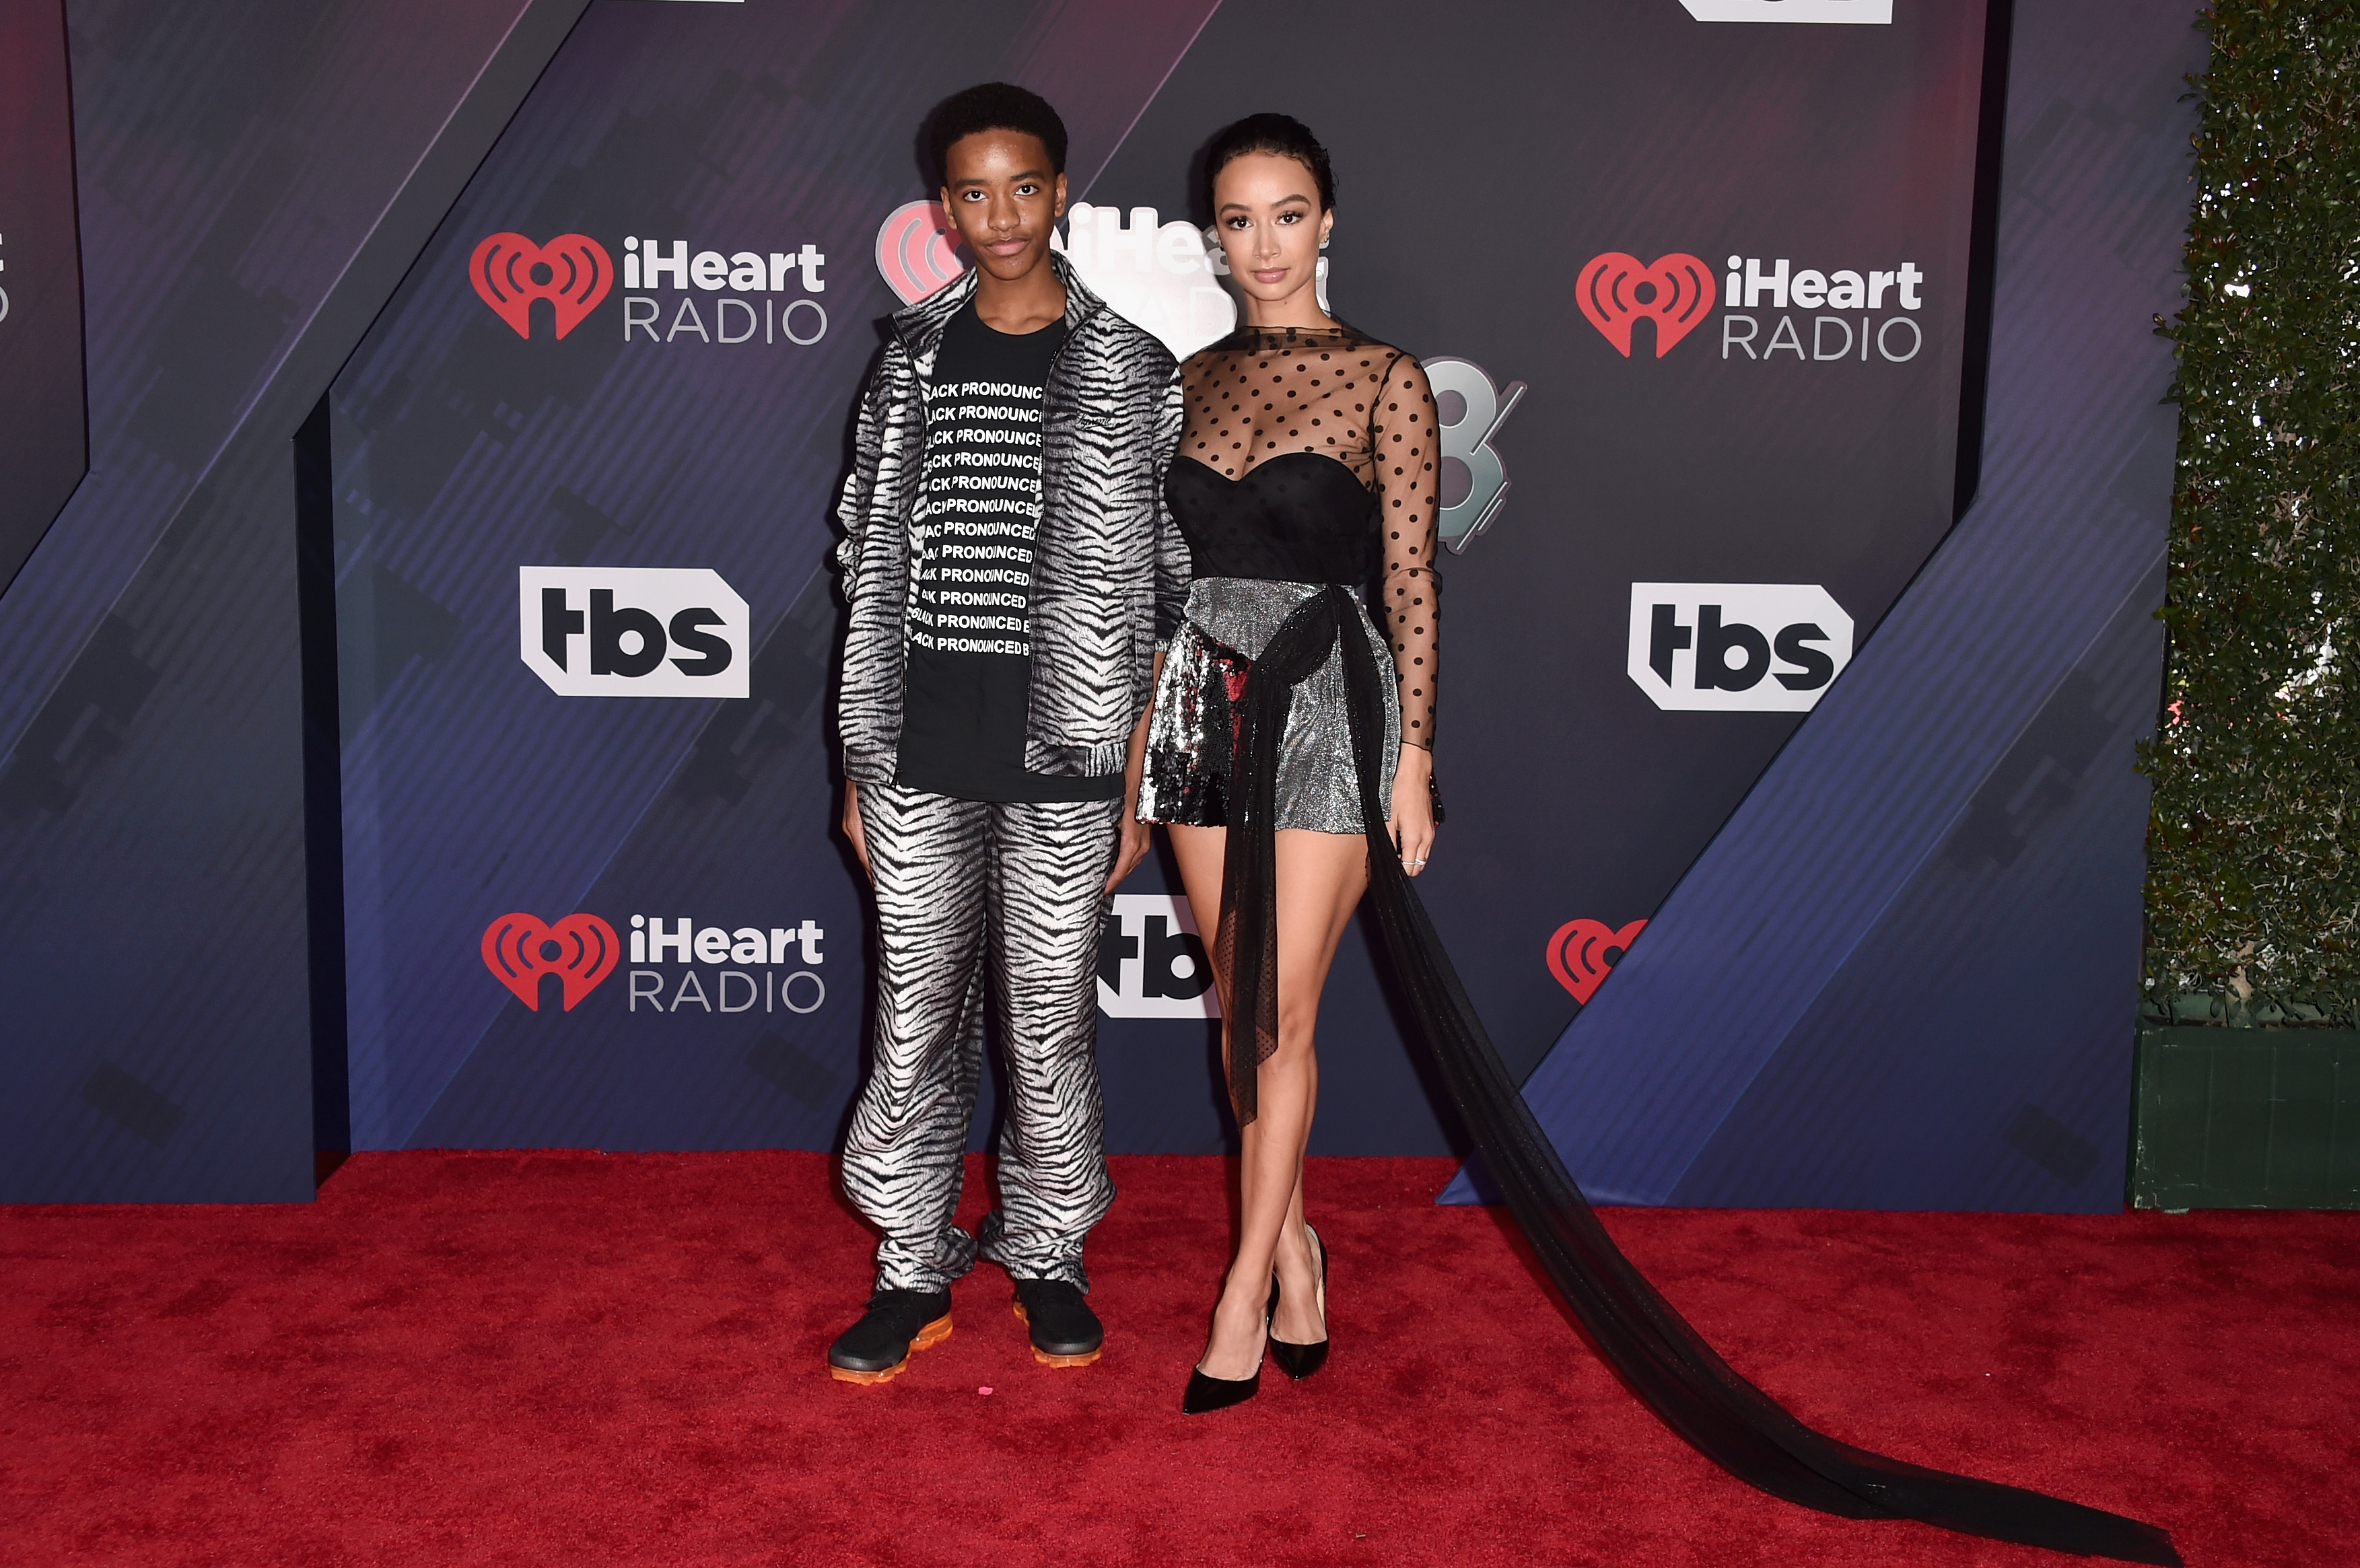 Kniko Howard and Draya Michele arrive at the 2018 iHeartRadio Music Awards at The Forum on March 11, 2018, in Inglewood, California. | Source: Getty Images